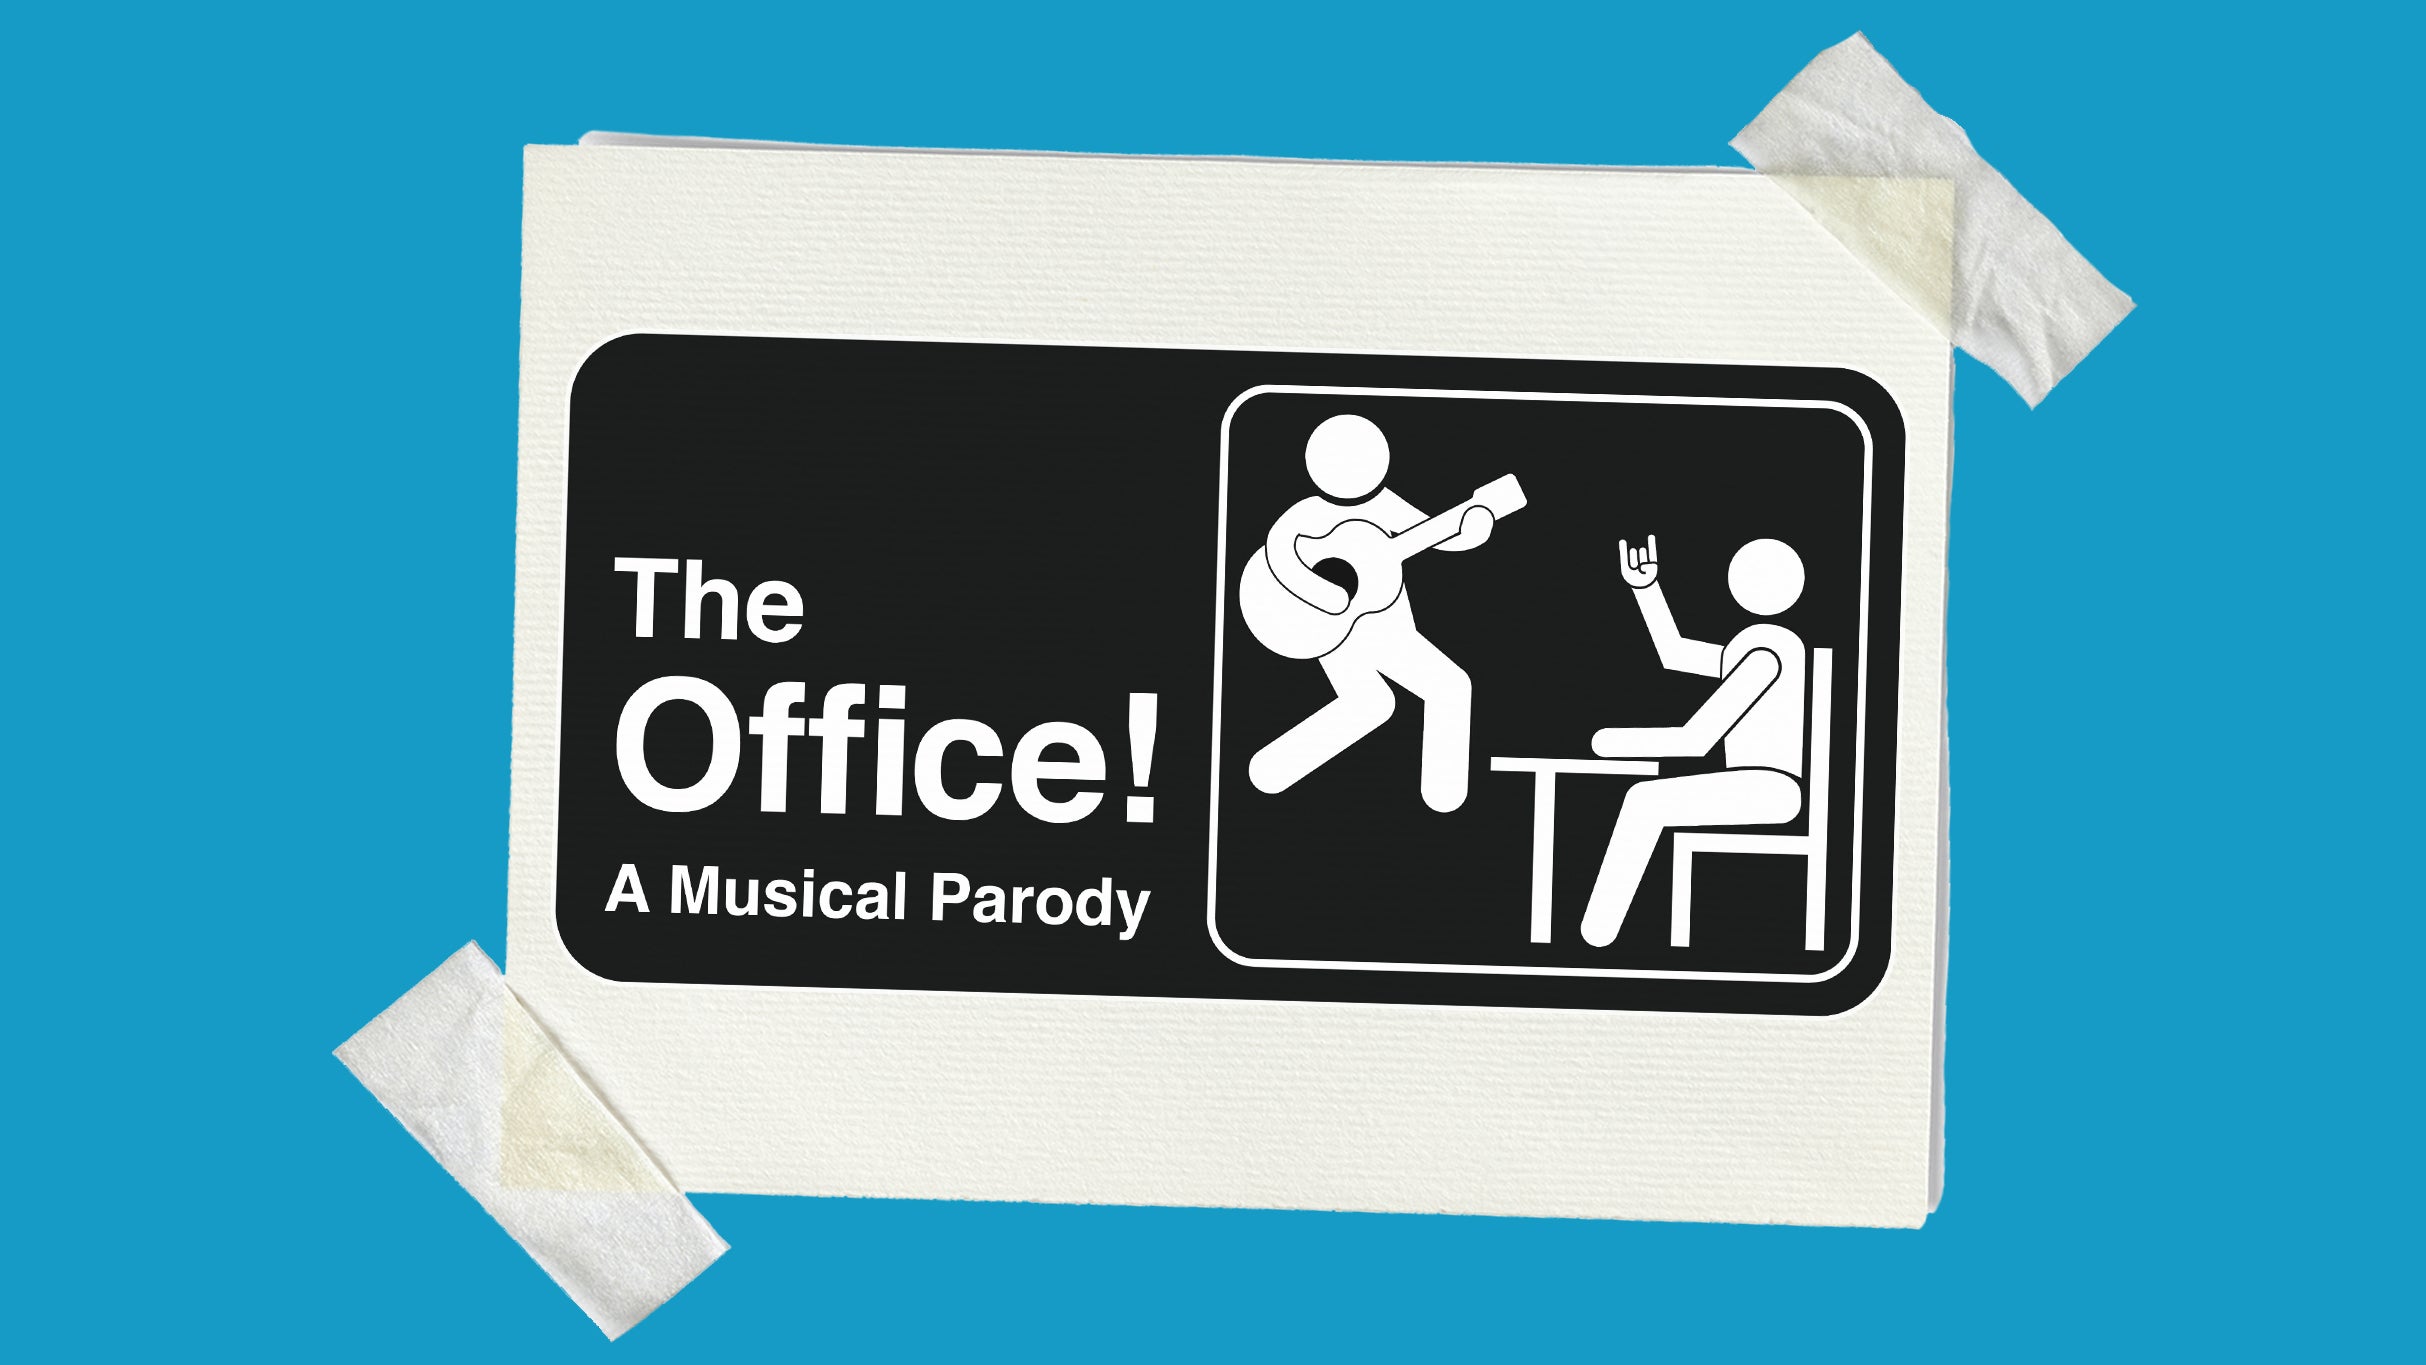 The Office! A Musical Parody at The Theater Center – New York, NY